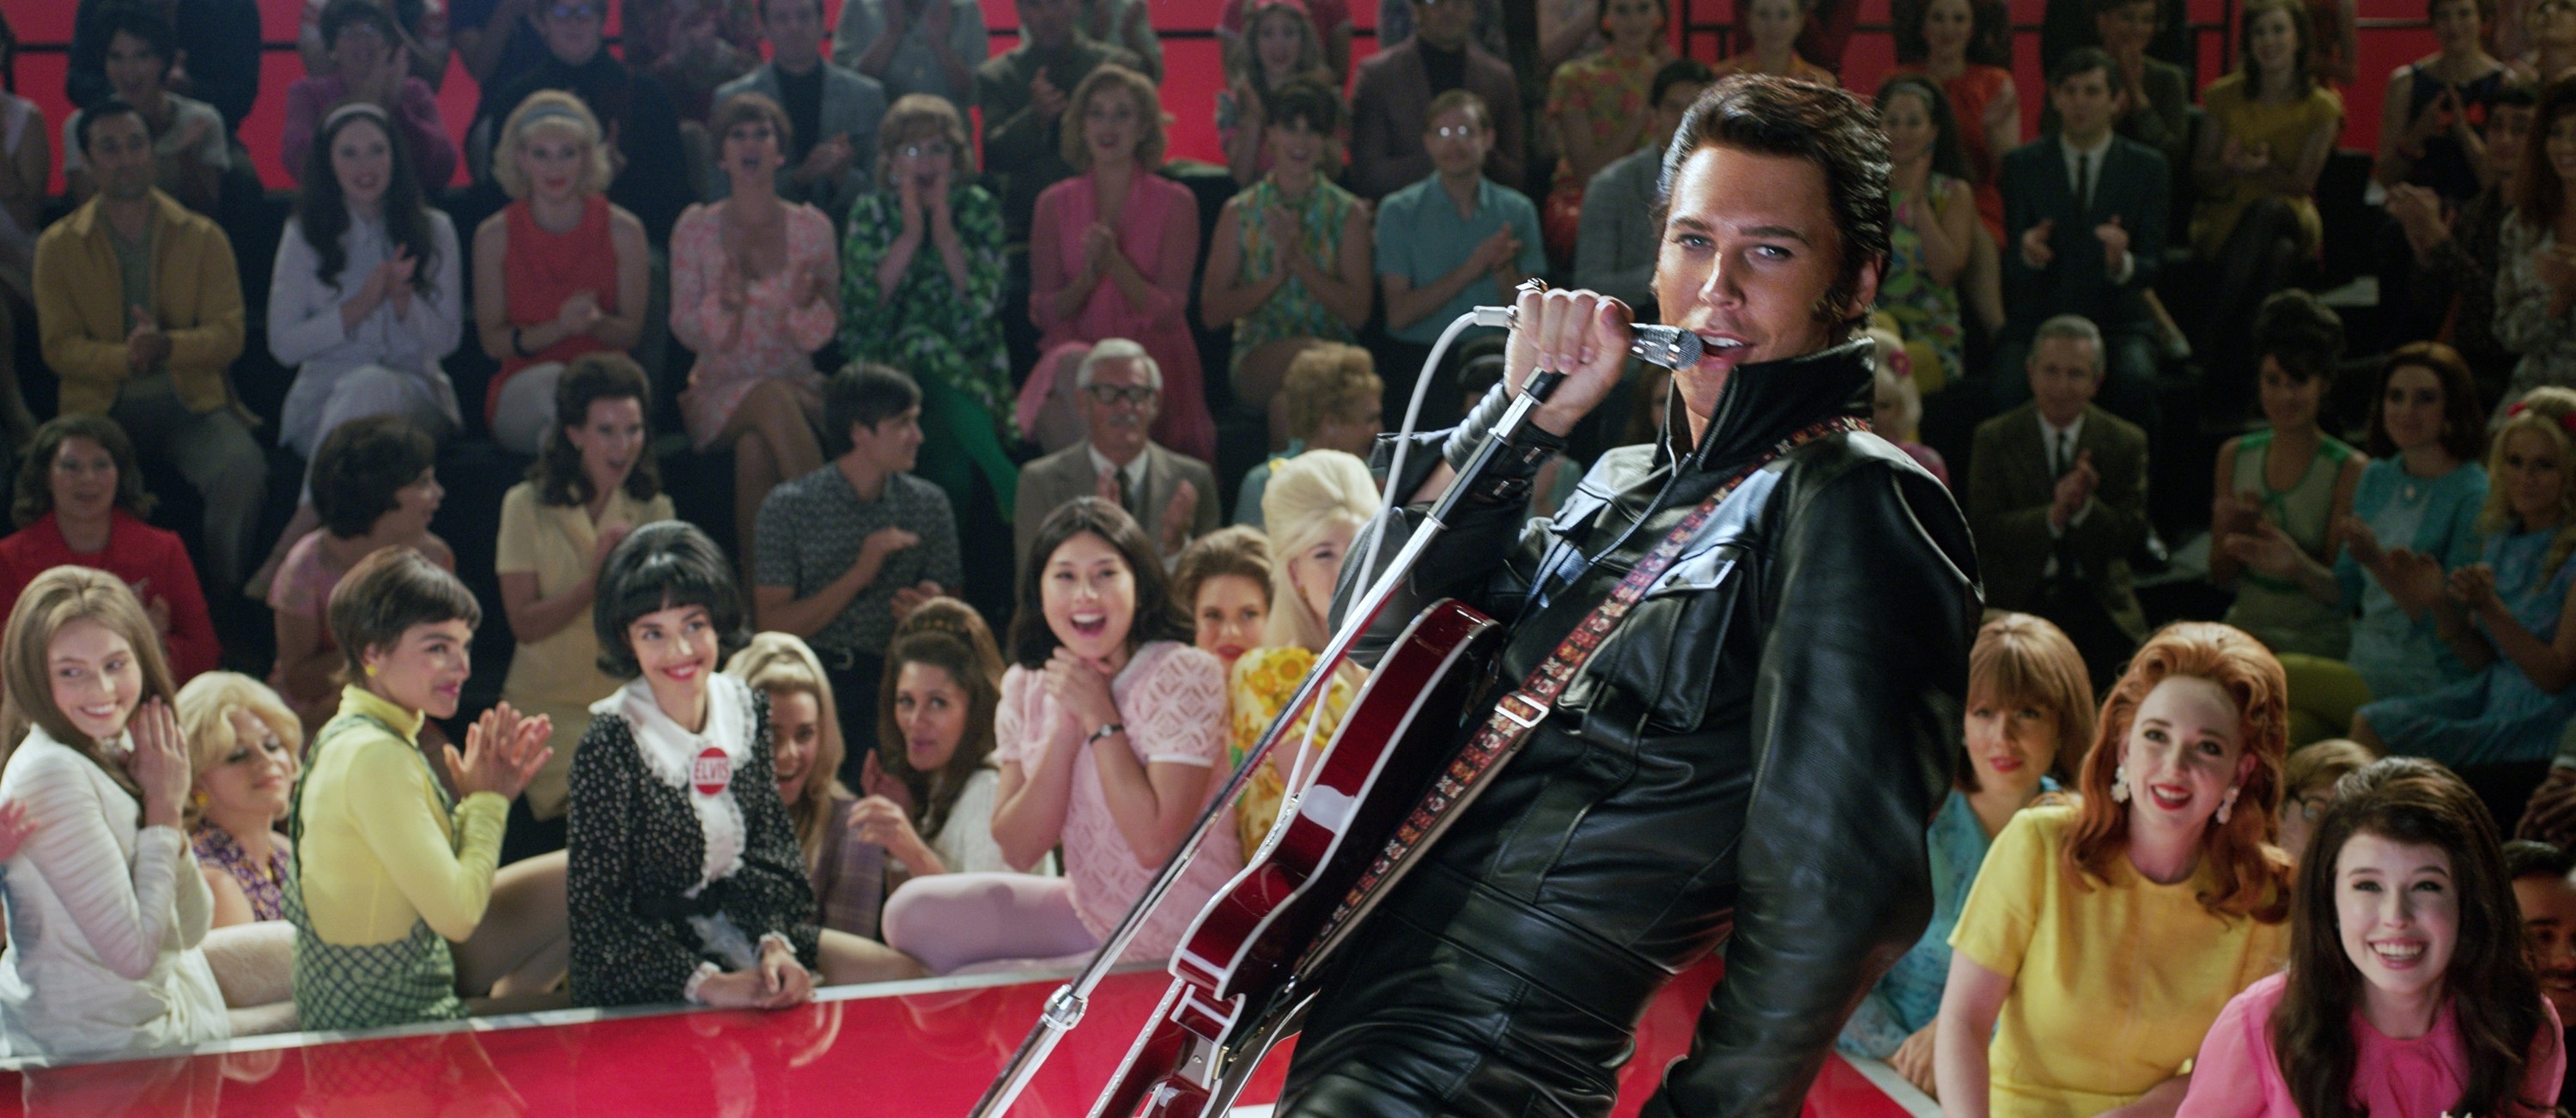 austin butler as Elvis performing on stage with an audience cheering